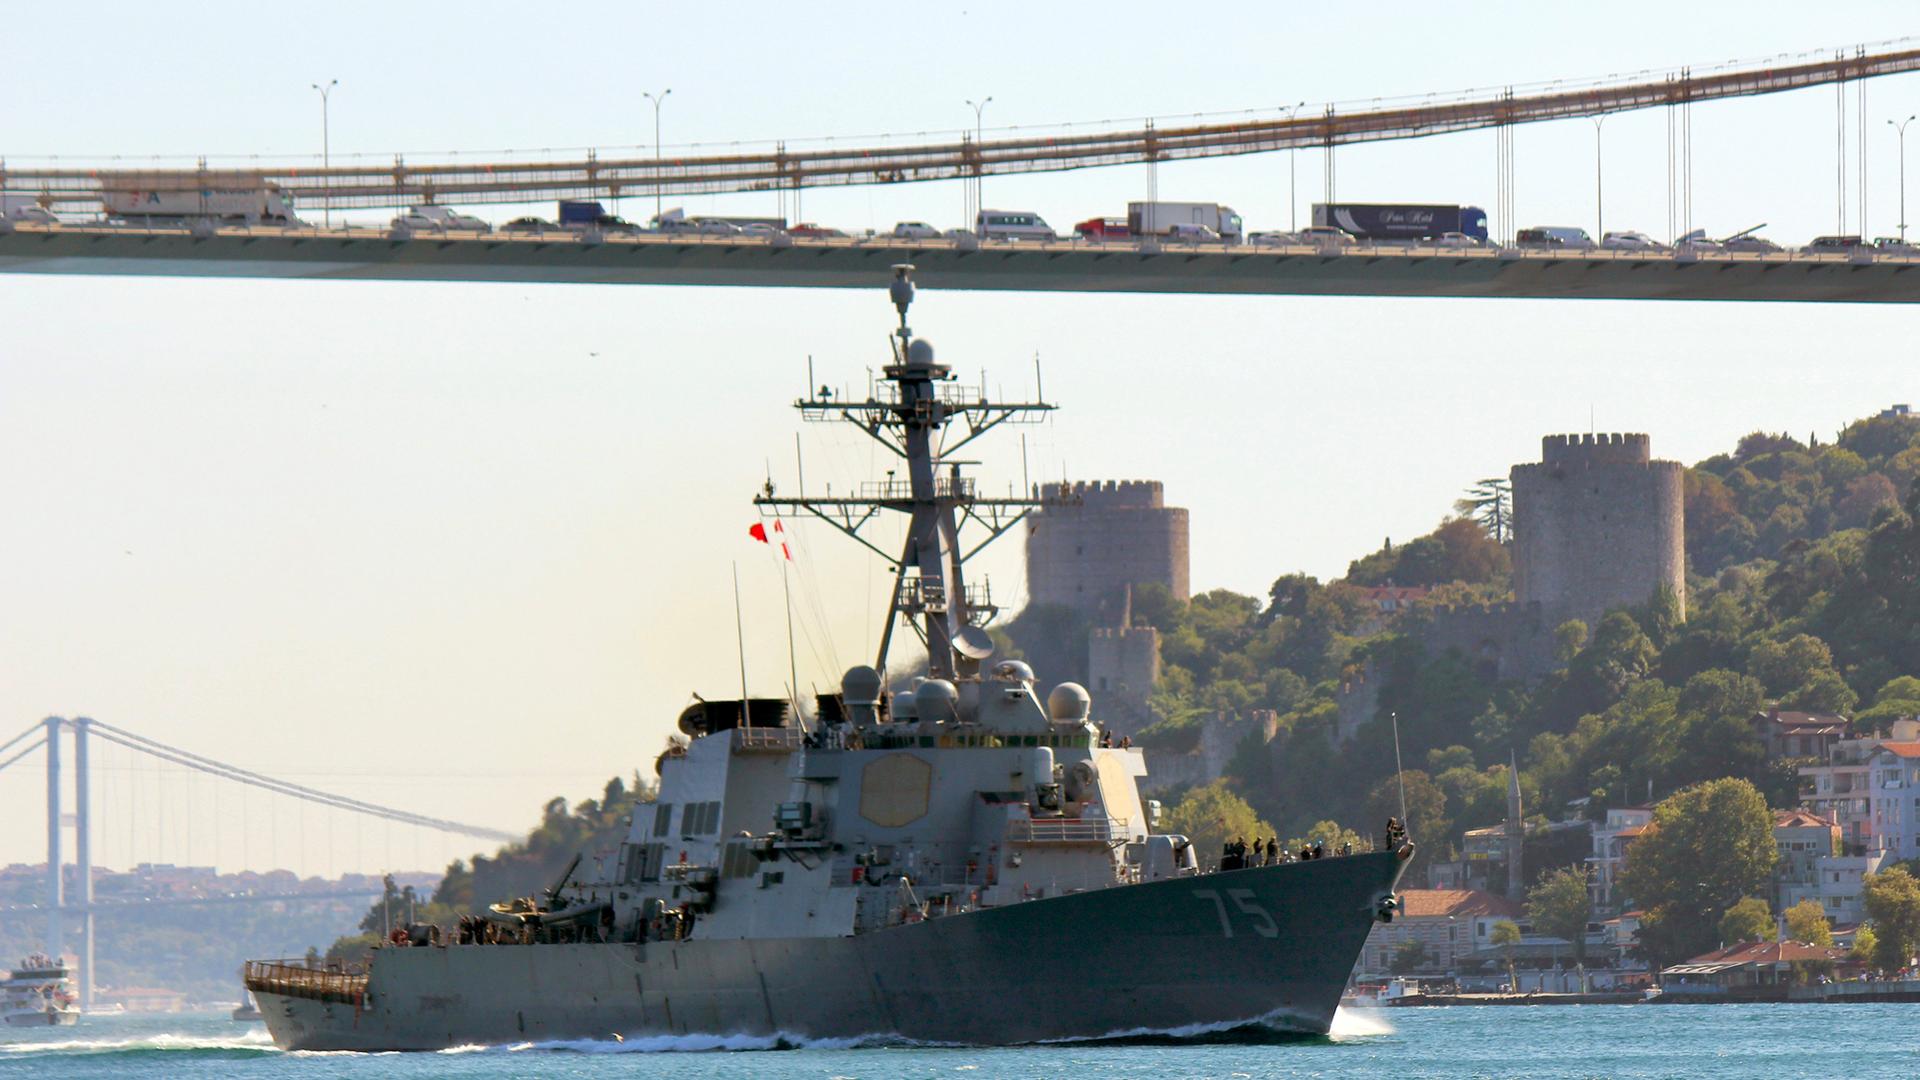 USS Donald Cook sails in the Bosphorus strait in Istanbul with a long cable bridge in the background.